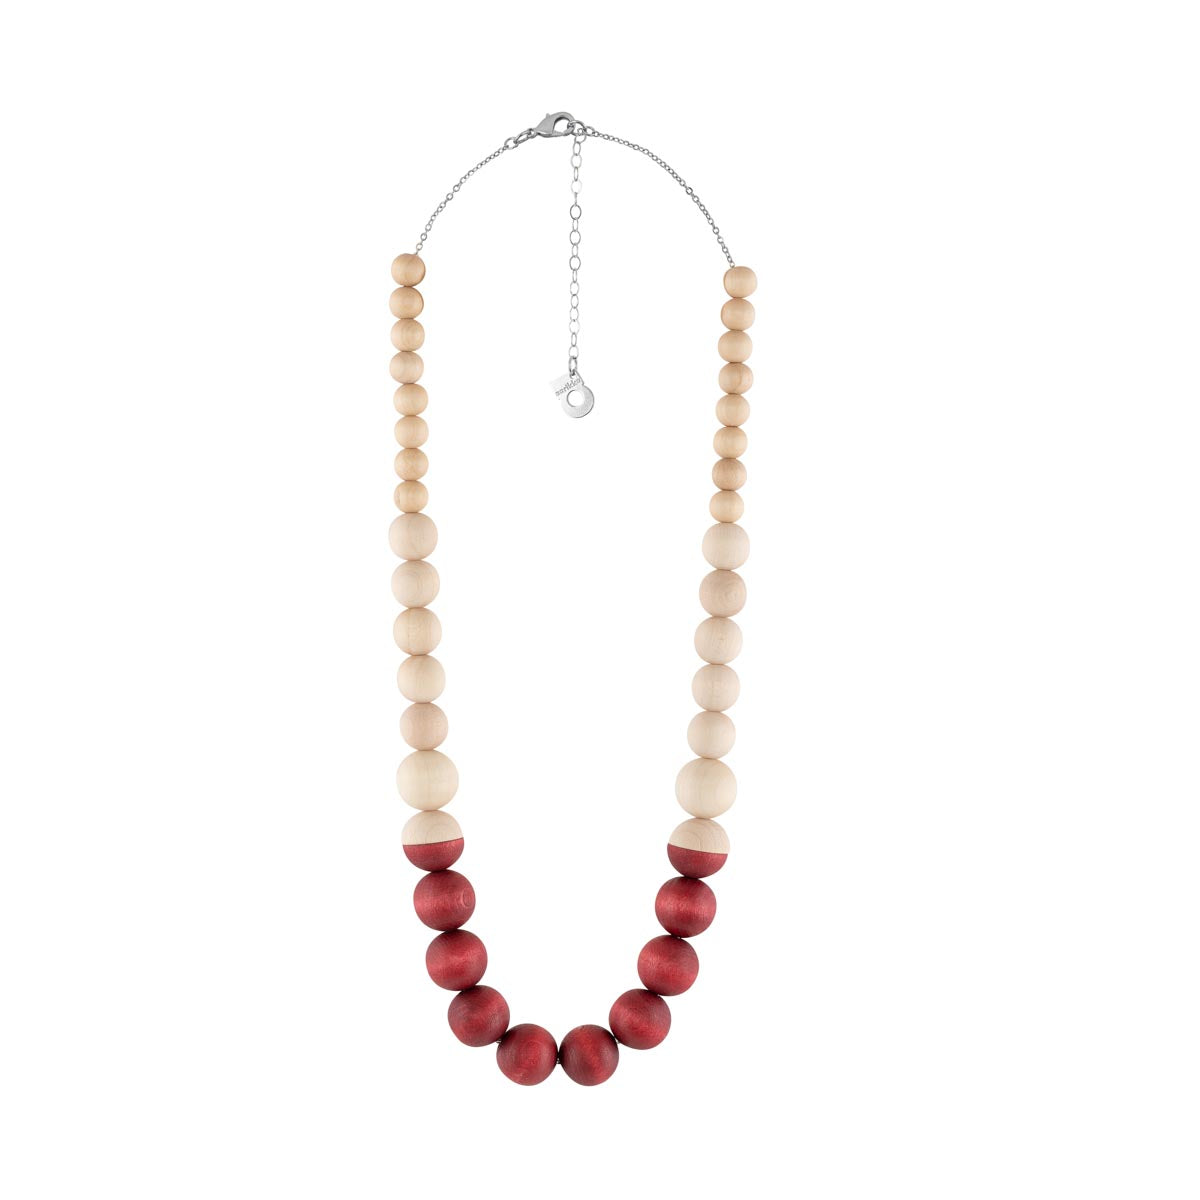 Leila necklace, wine red